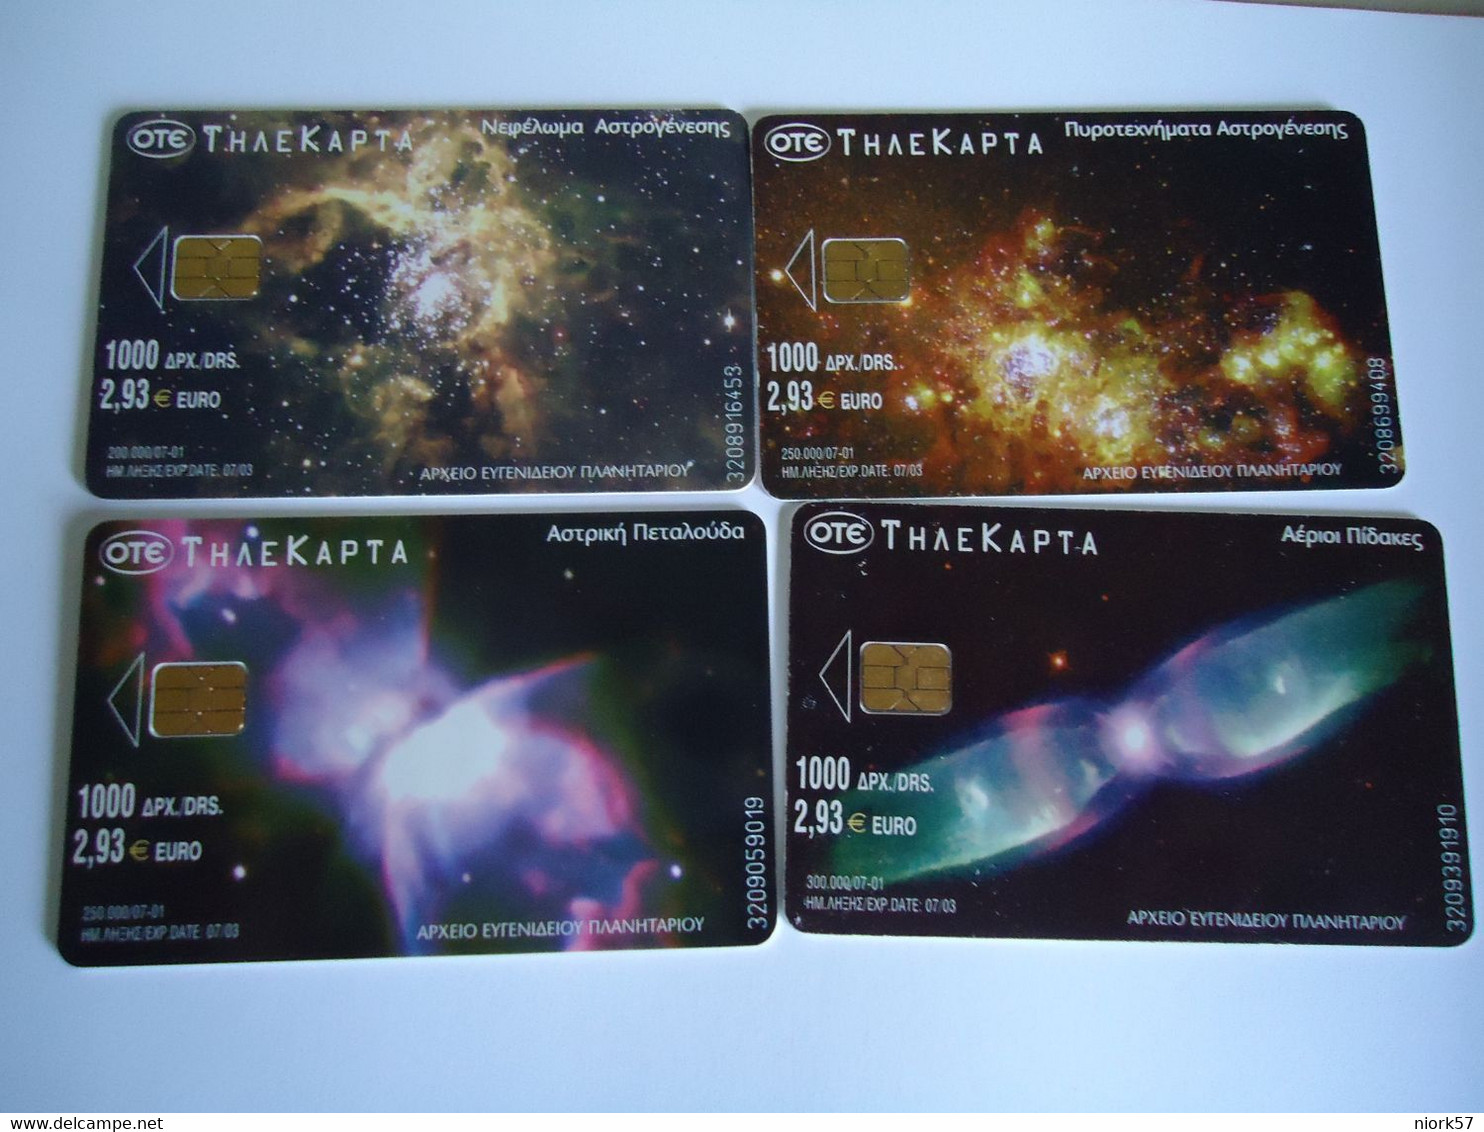 GREECE  USED 4 CARDS  PLANET  SPACE 2 SCAN - Raumfahrt